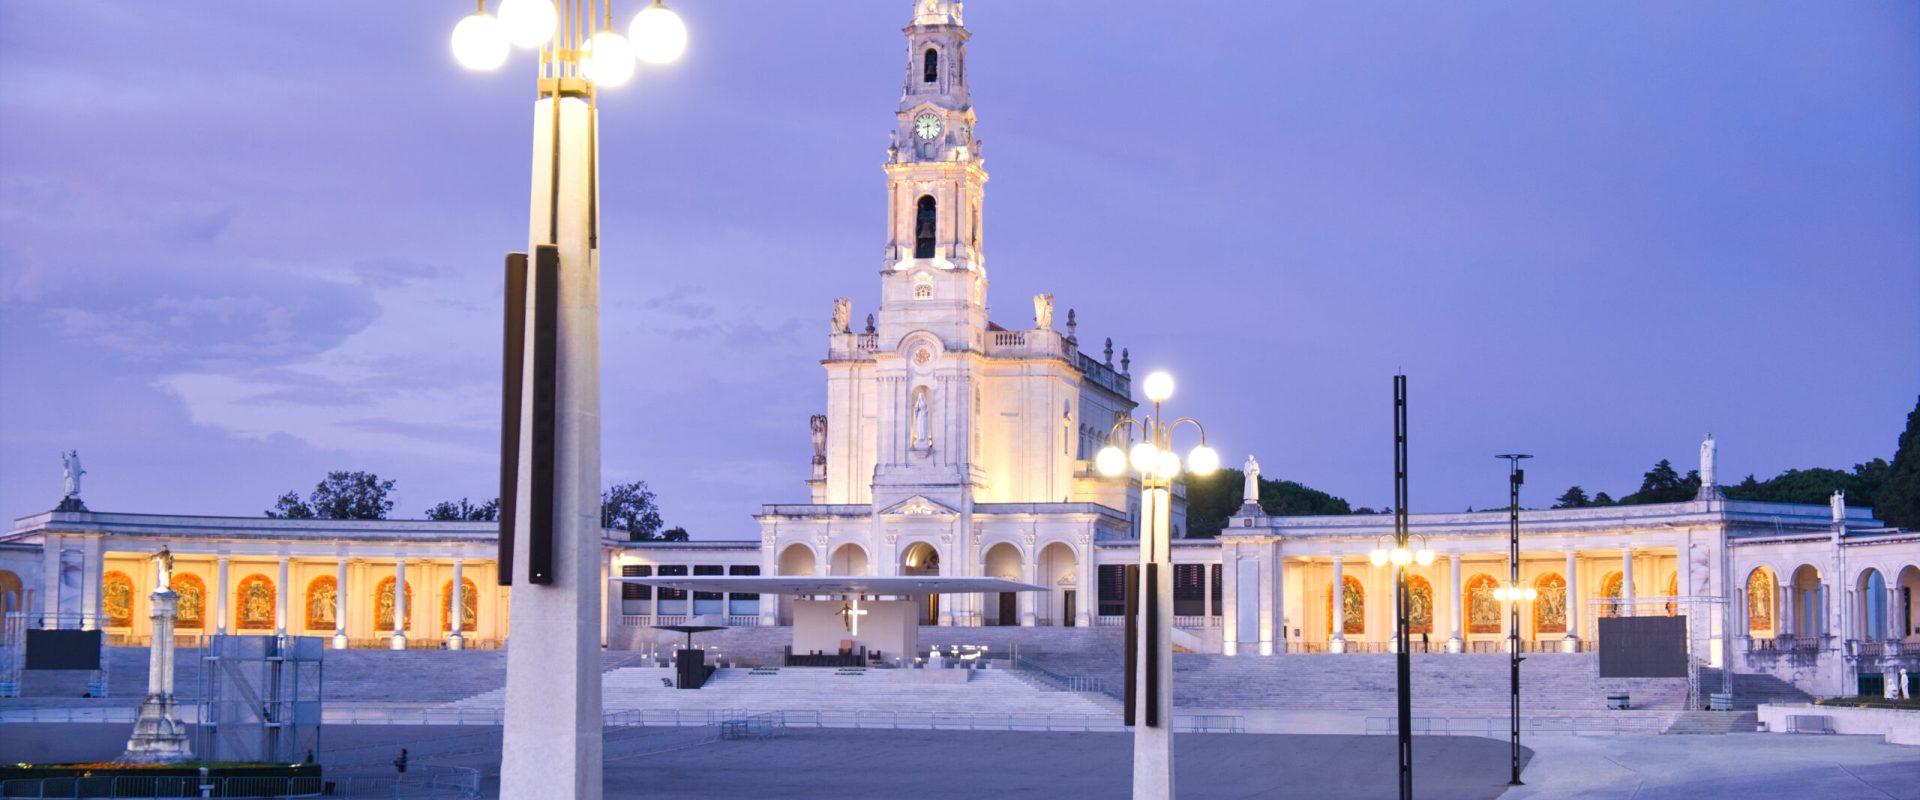 The Fatima Sanctuary, also referred to as Basilica of Our Lady of the Rosary. Fatima is one of the most important pilgrimage destinations for Catholics.